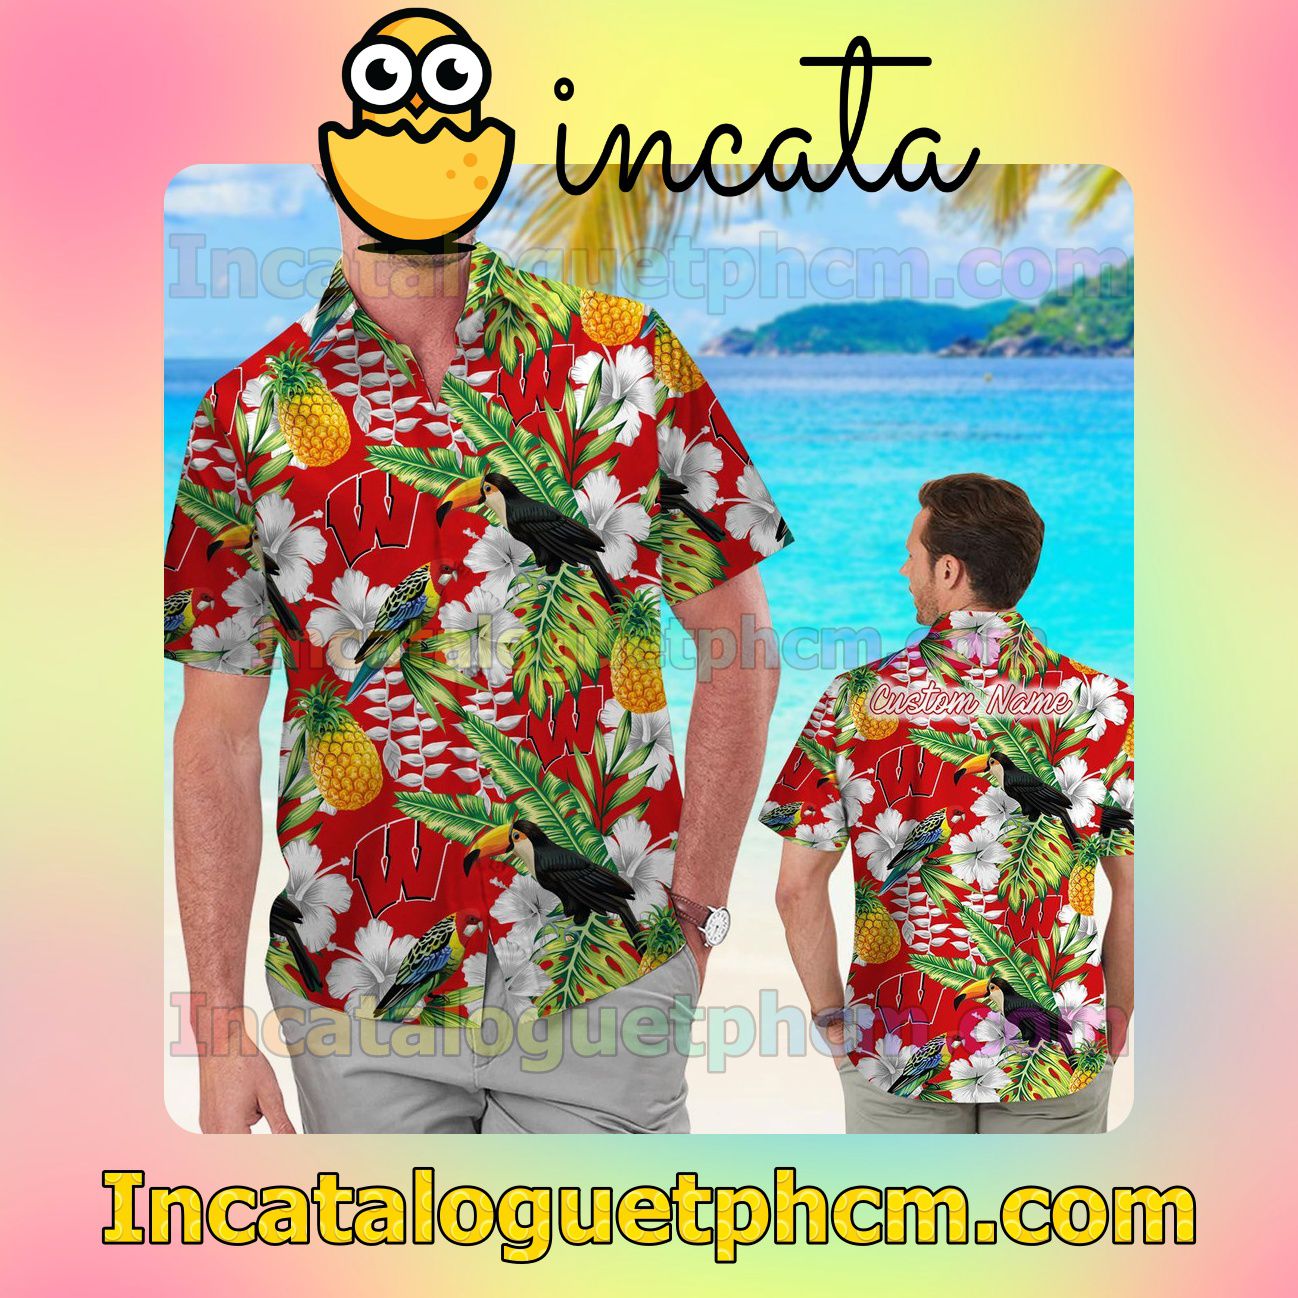 Personalized Wisconsin Badgers Parrot Floral Tropical Beach Vacation Shirt, Swim Shorts